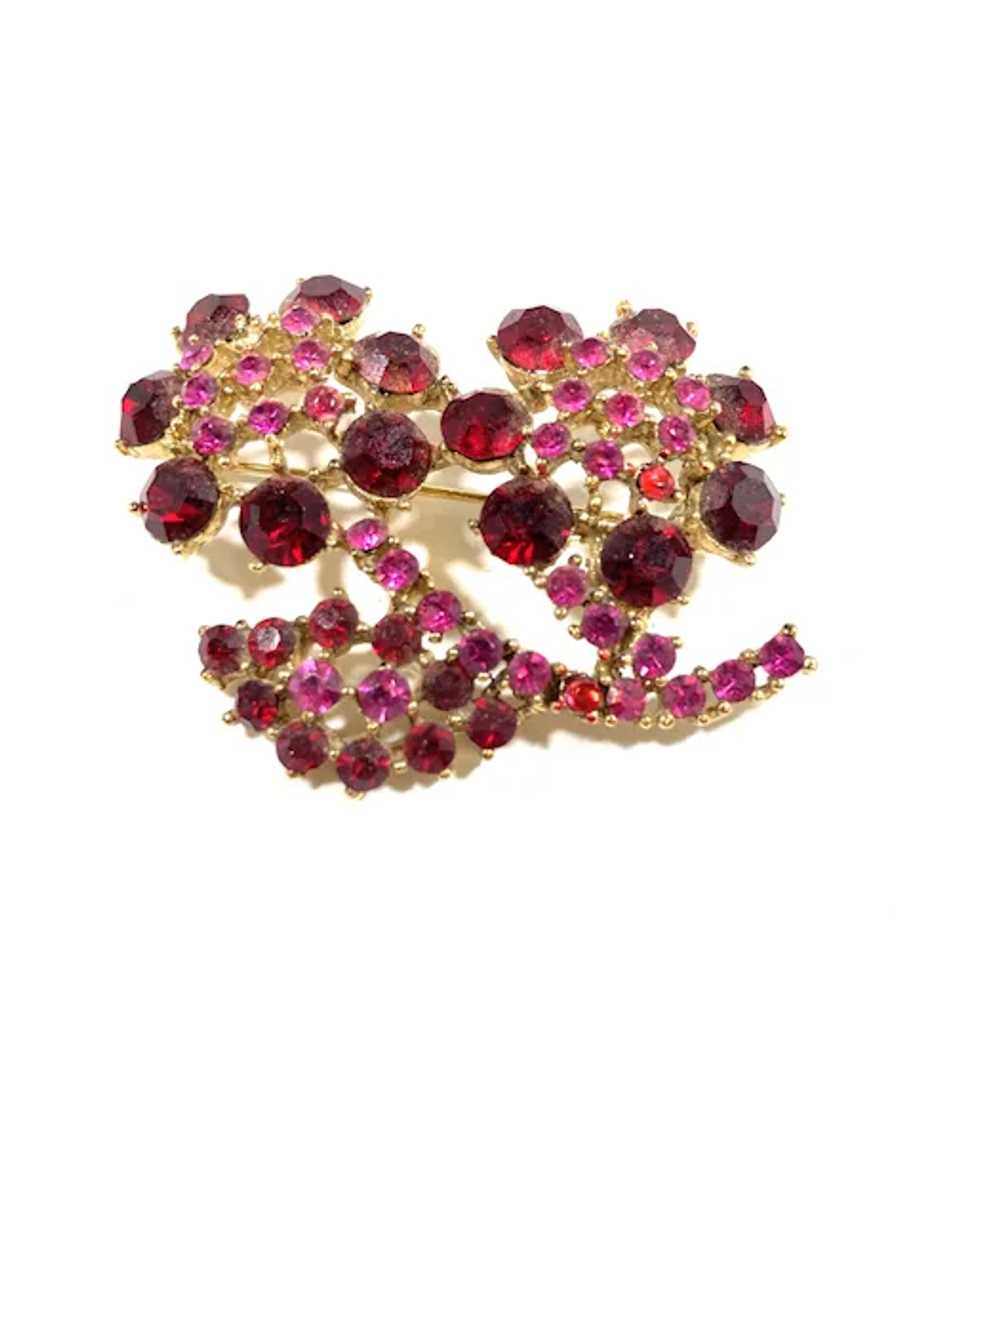 Red and Pink Rhinestone Floral Bouquet Brooch - image 3